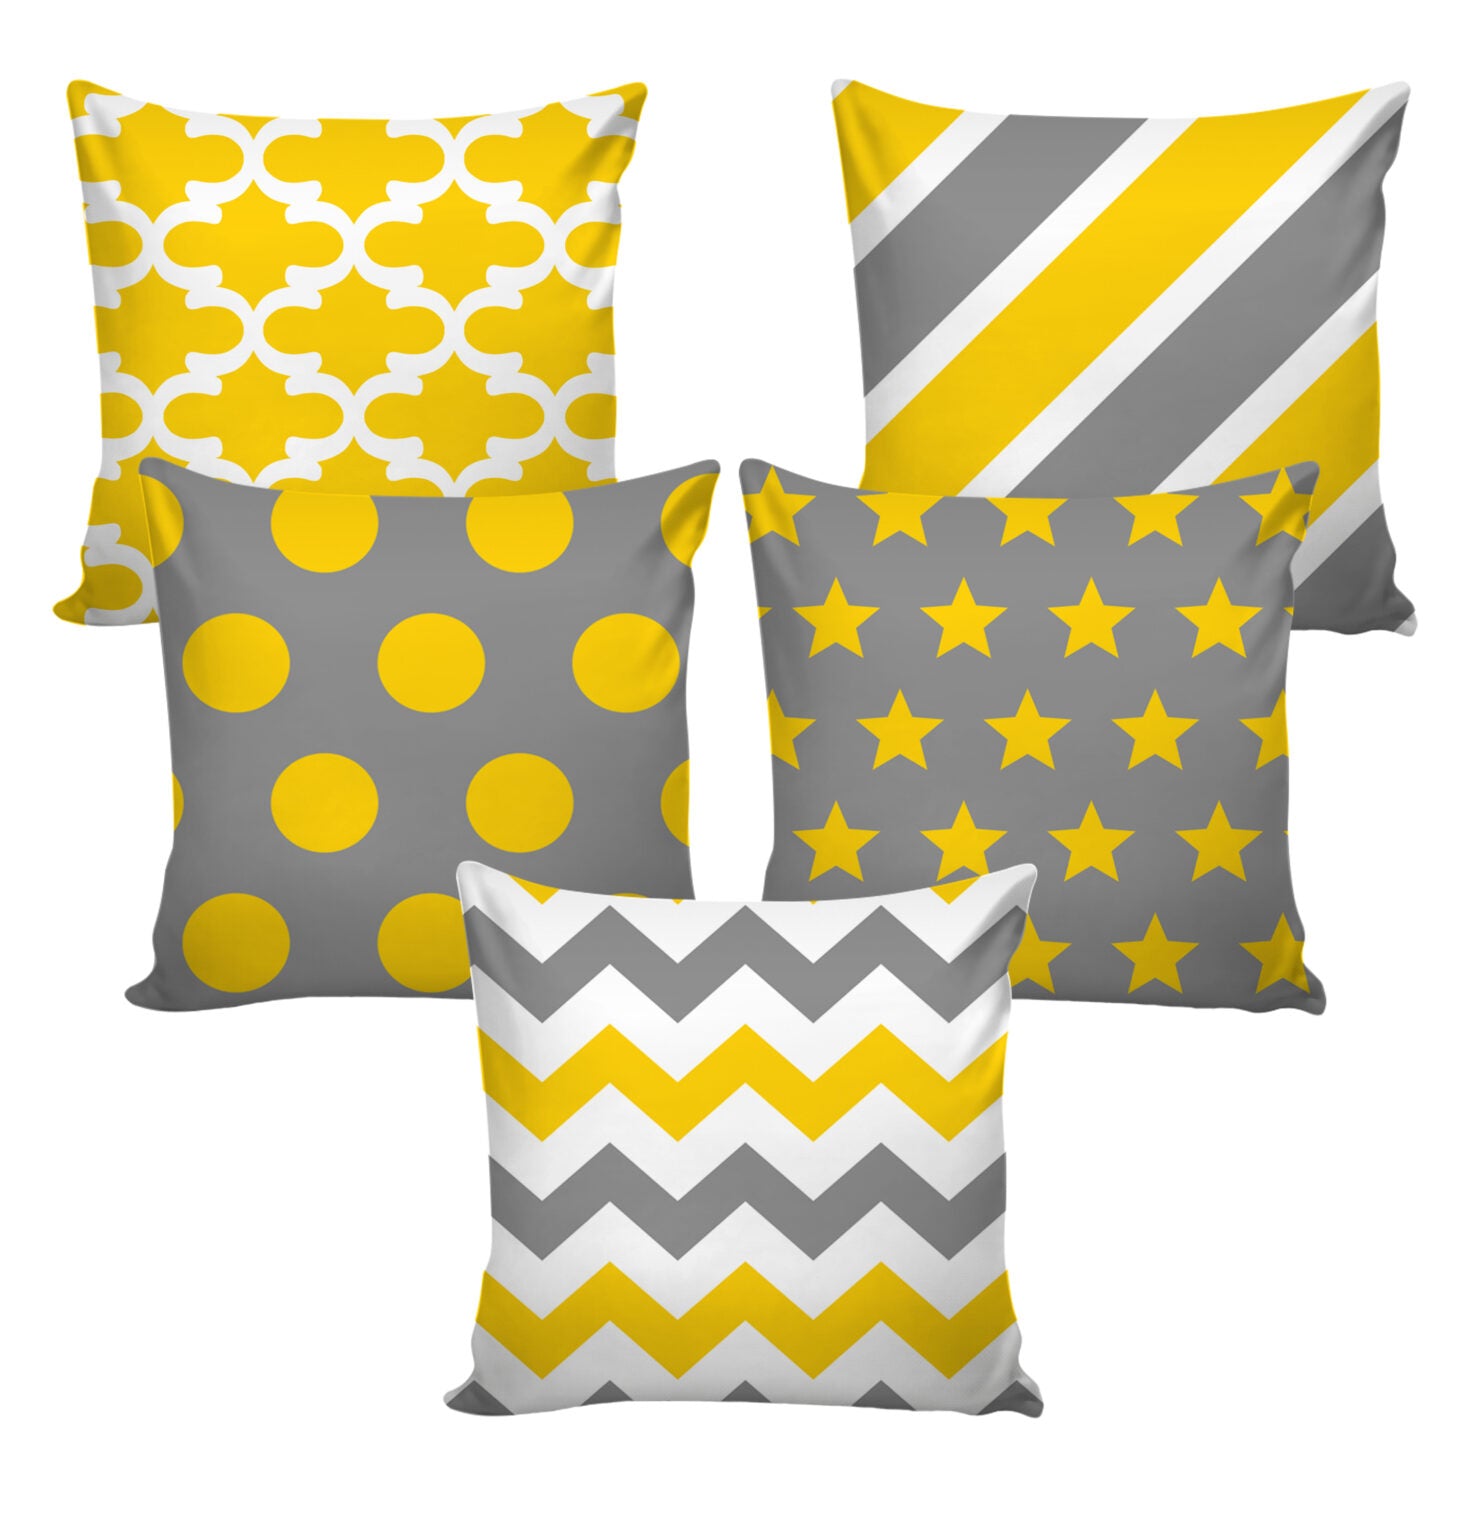 Set of 5 Jute Throw Pillow/Cushion Covers – yellow and grey